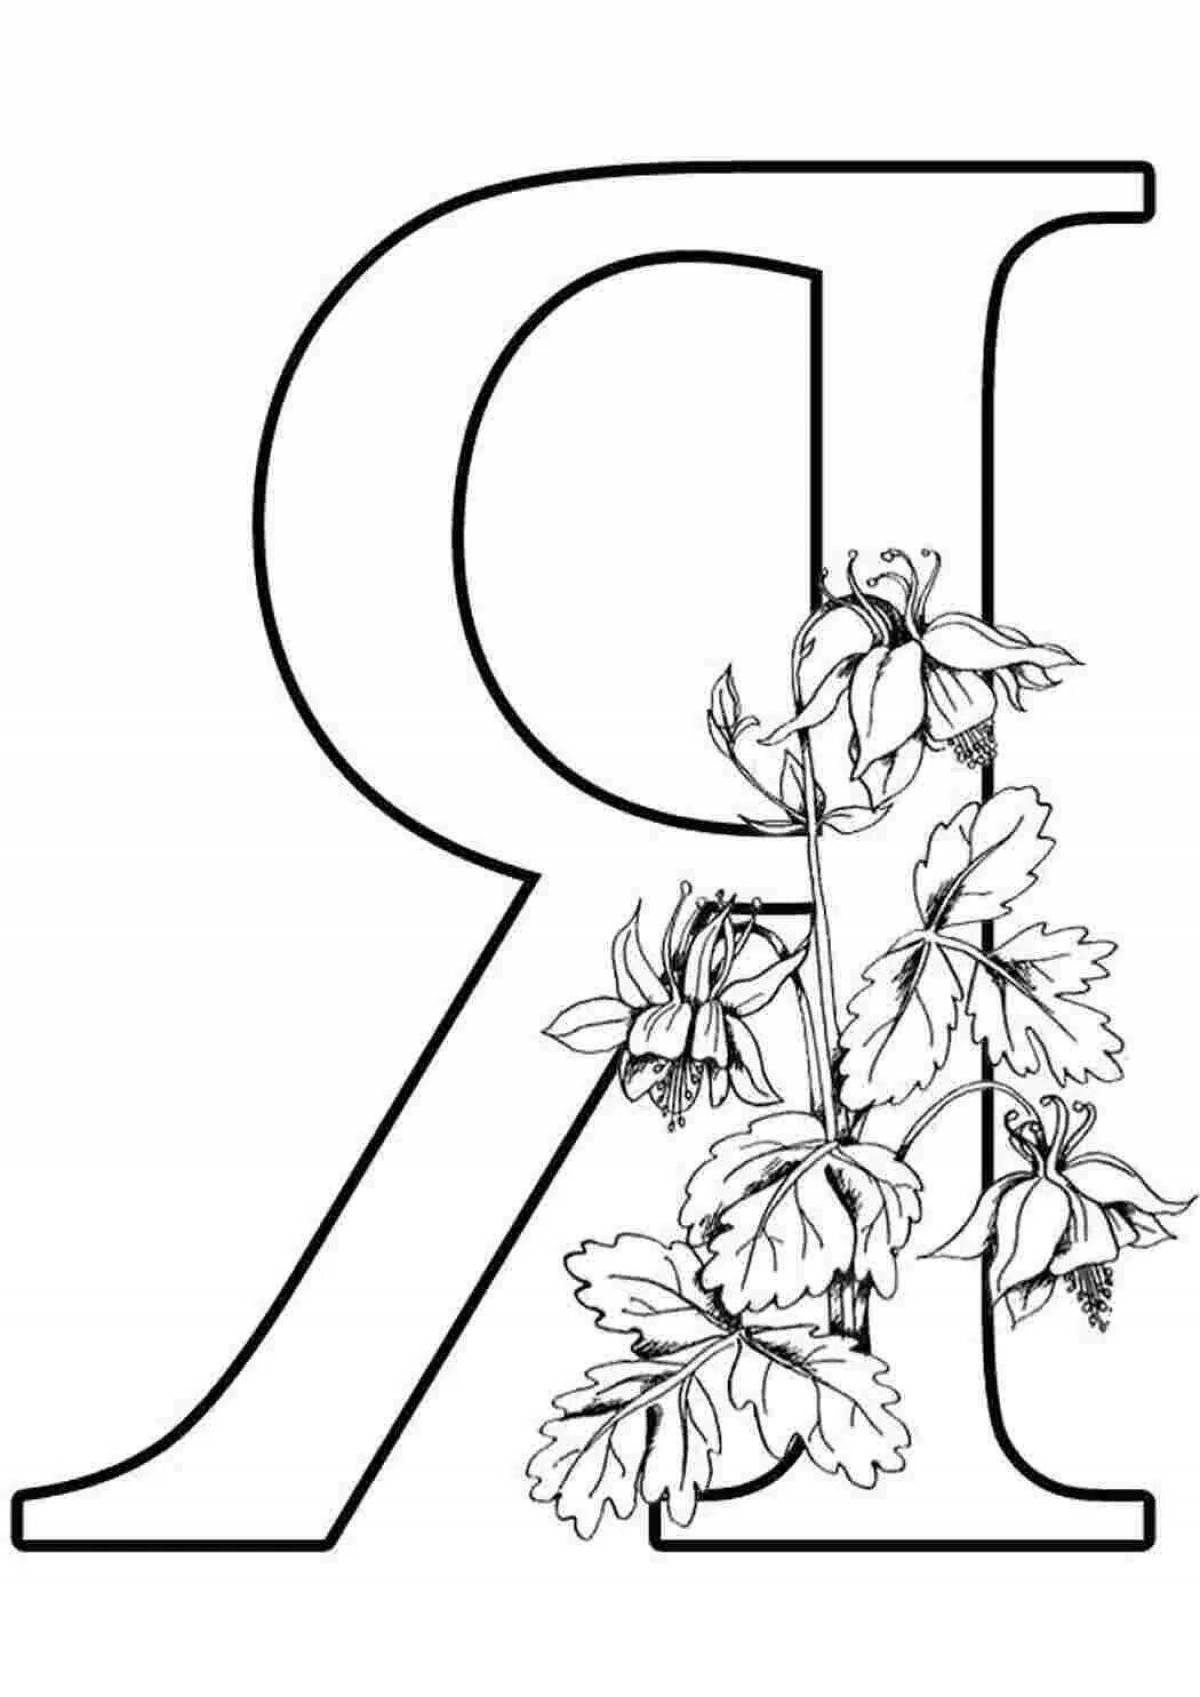 Delightful letter c brilliance with flowers